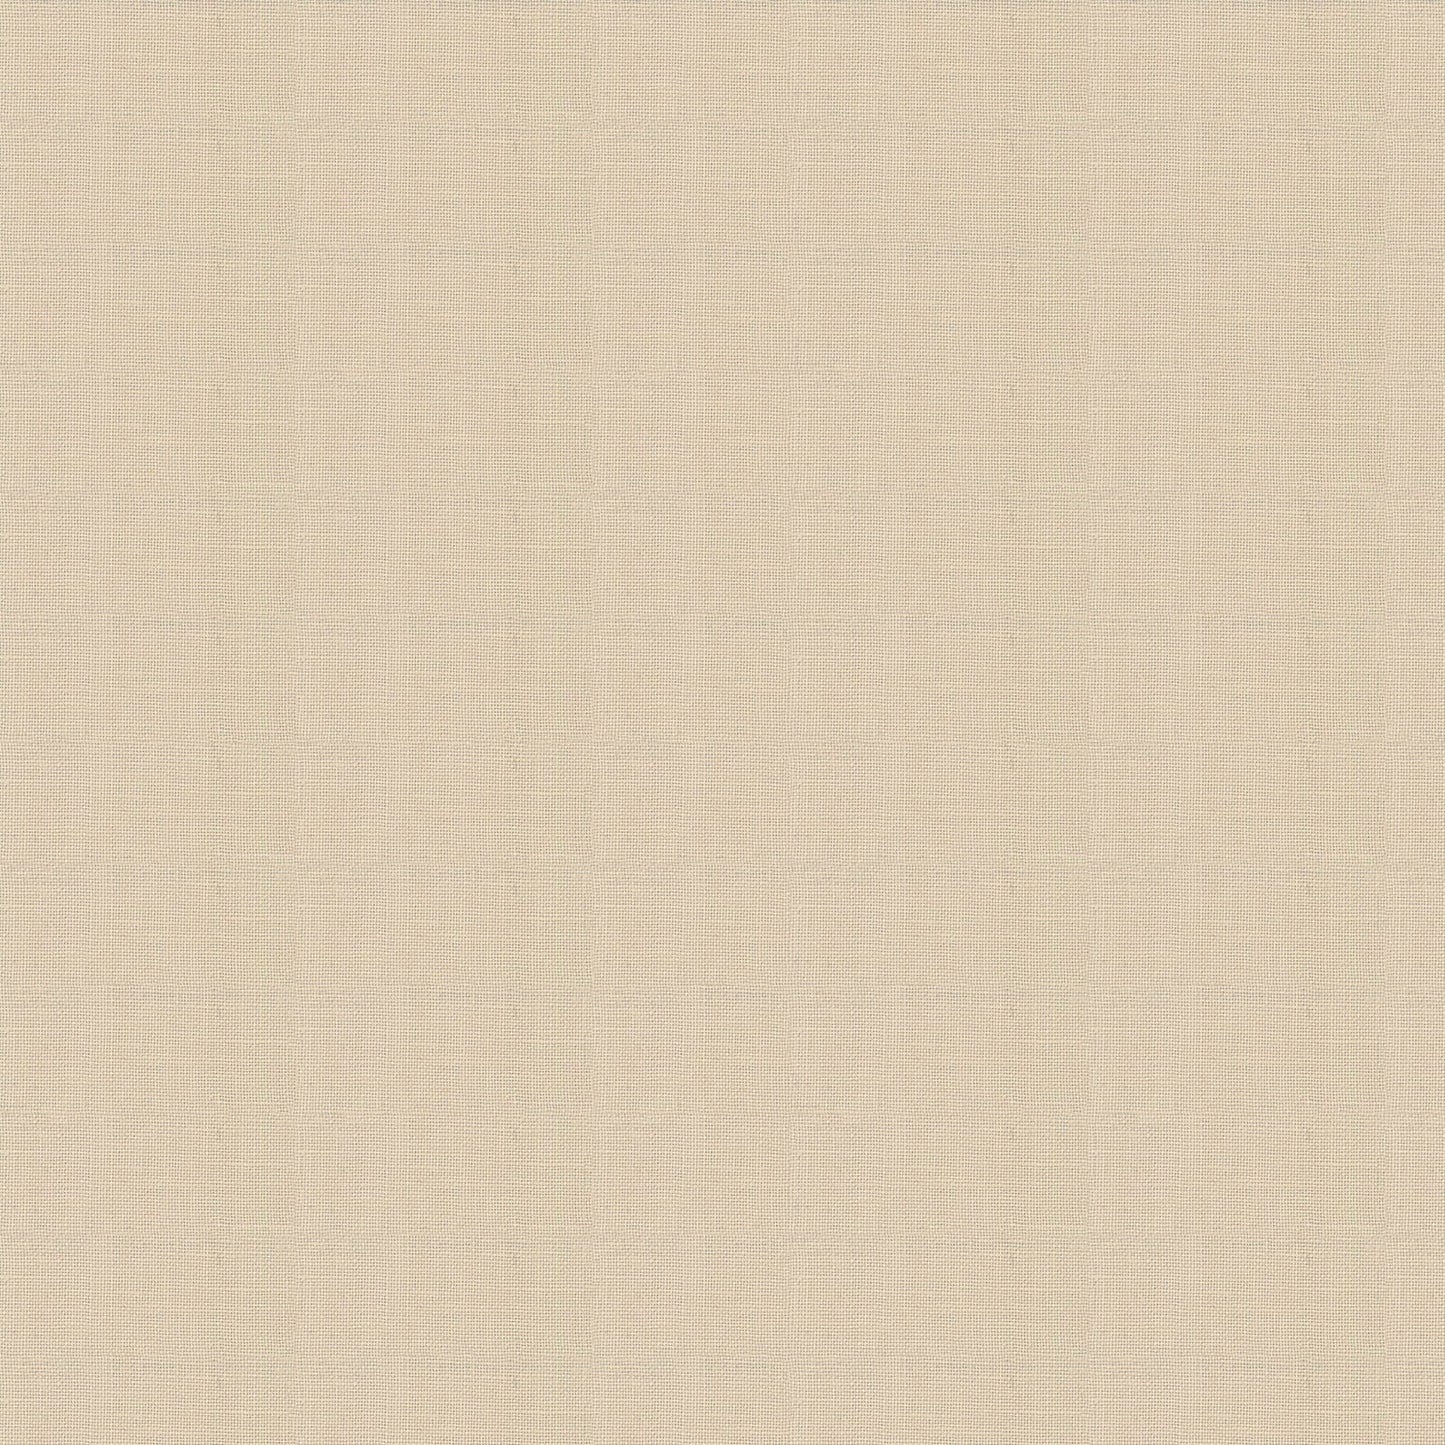 Silky Cotton Solids Japanese Quilting Fabric - Light Beige